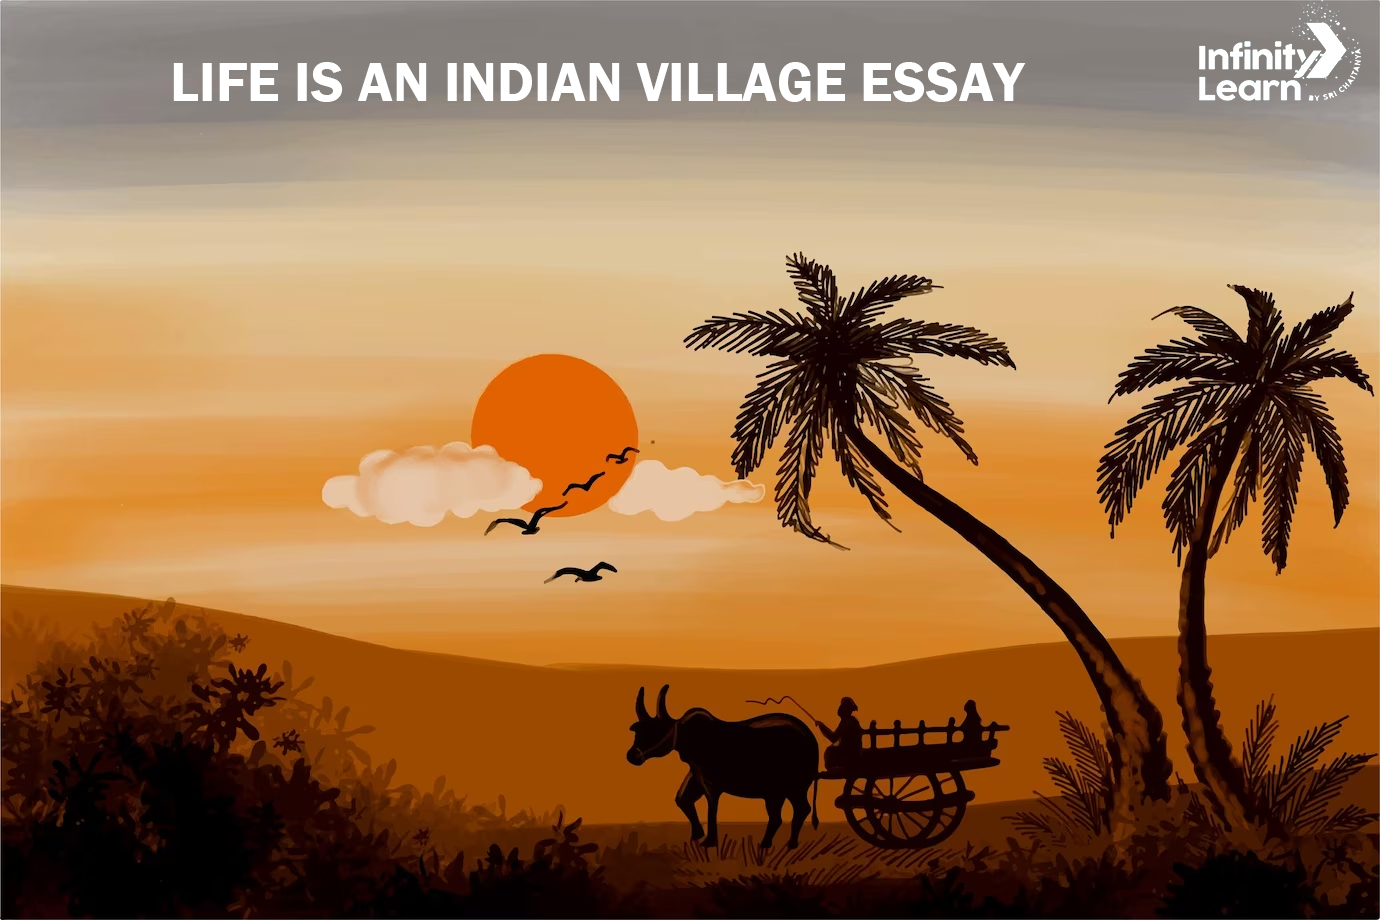 Life in an Indian Village Essay